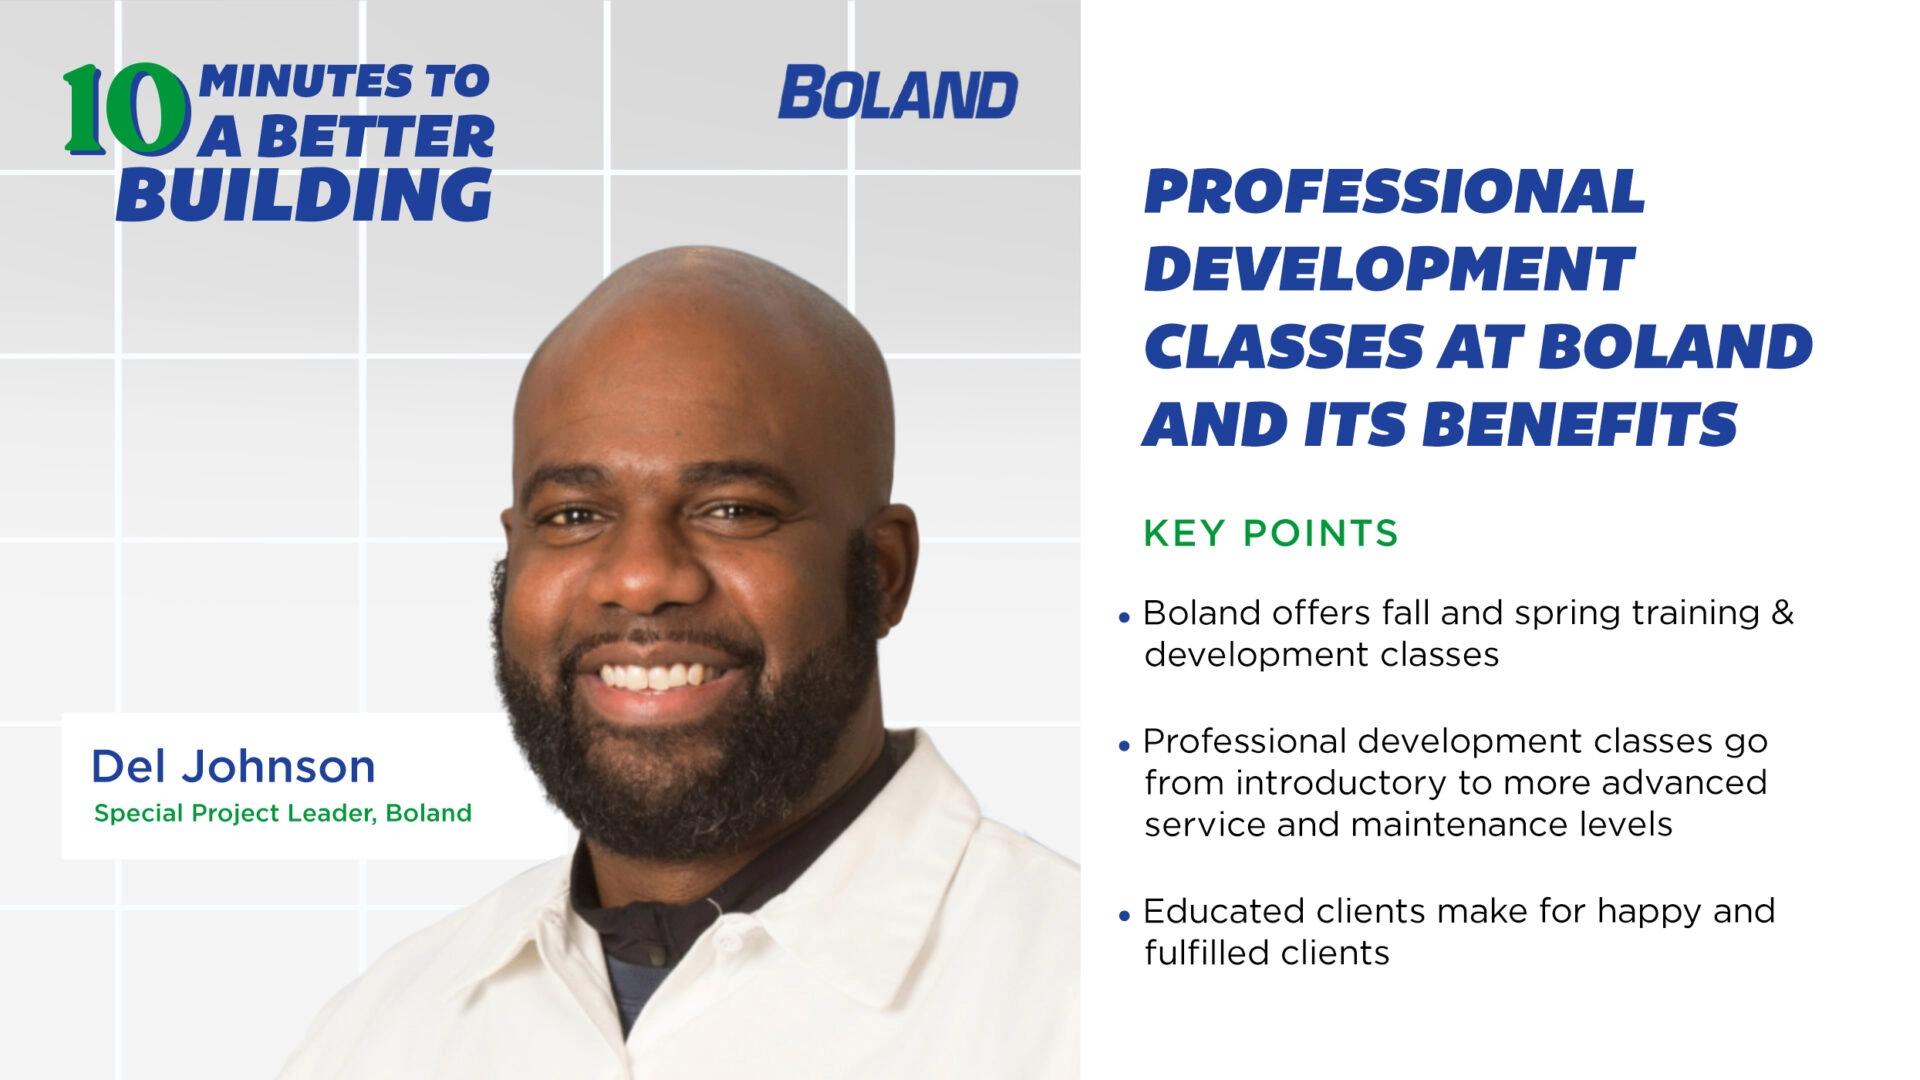 The Benefits of Boland Professional Development Courses with Del Johnson